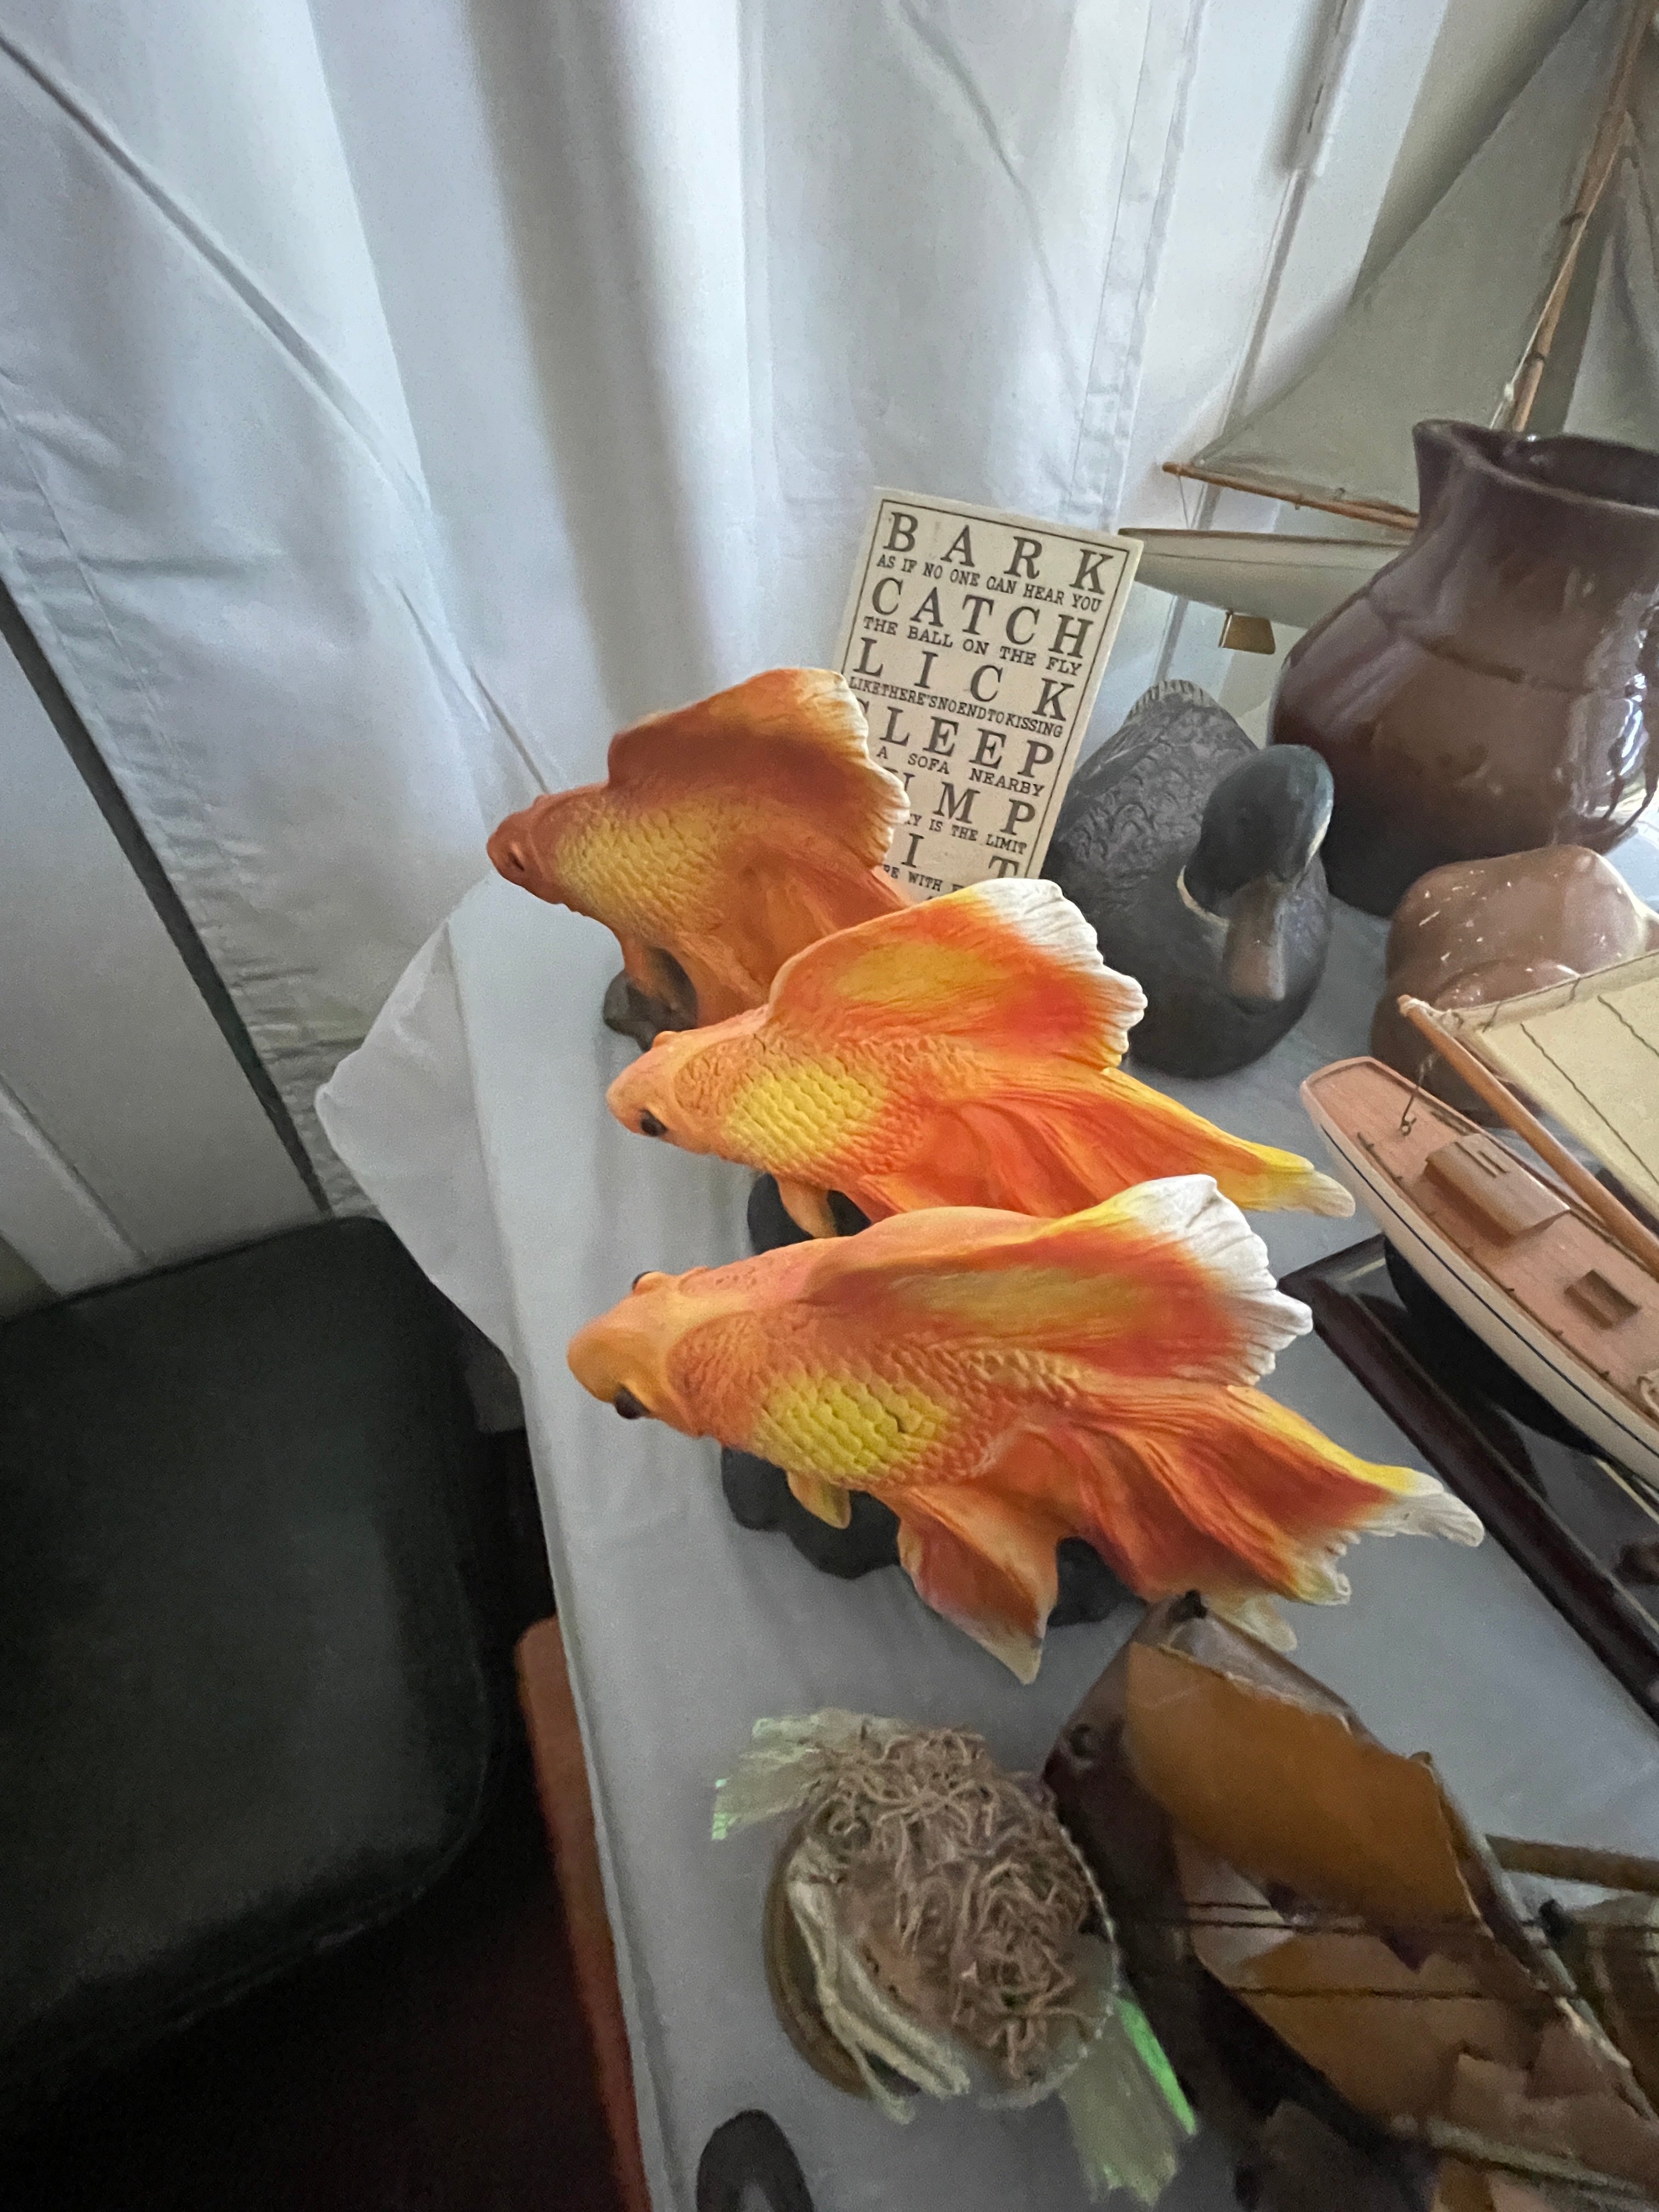 Bel Air Estate Sale - Wednesday 11/9/22 and Thursday 11/10/22